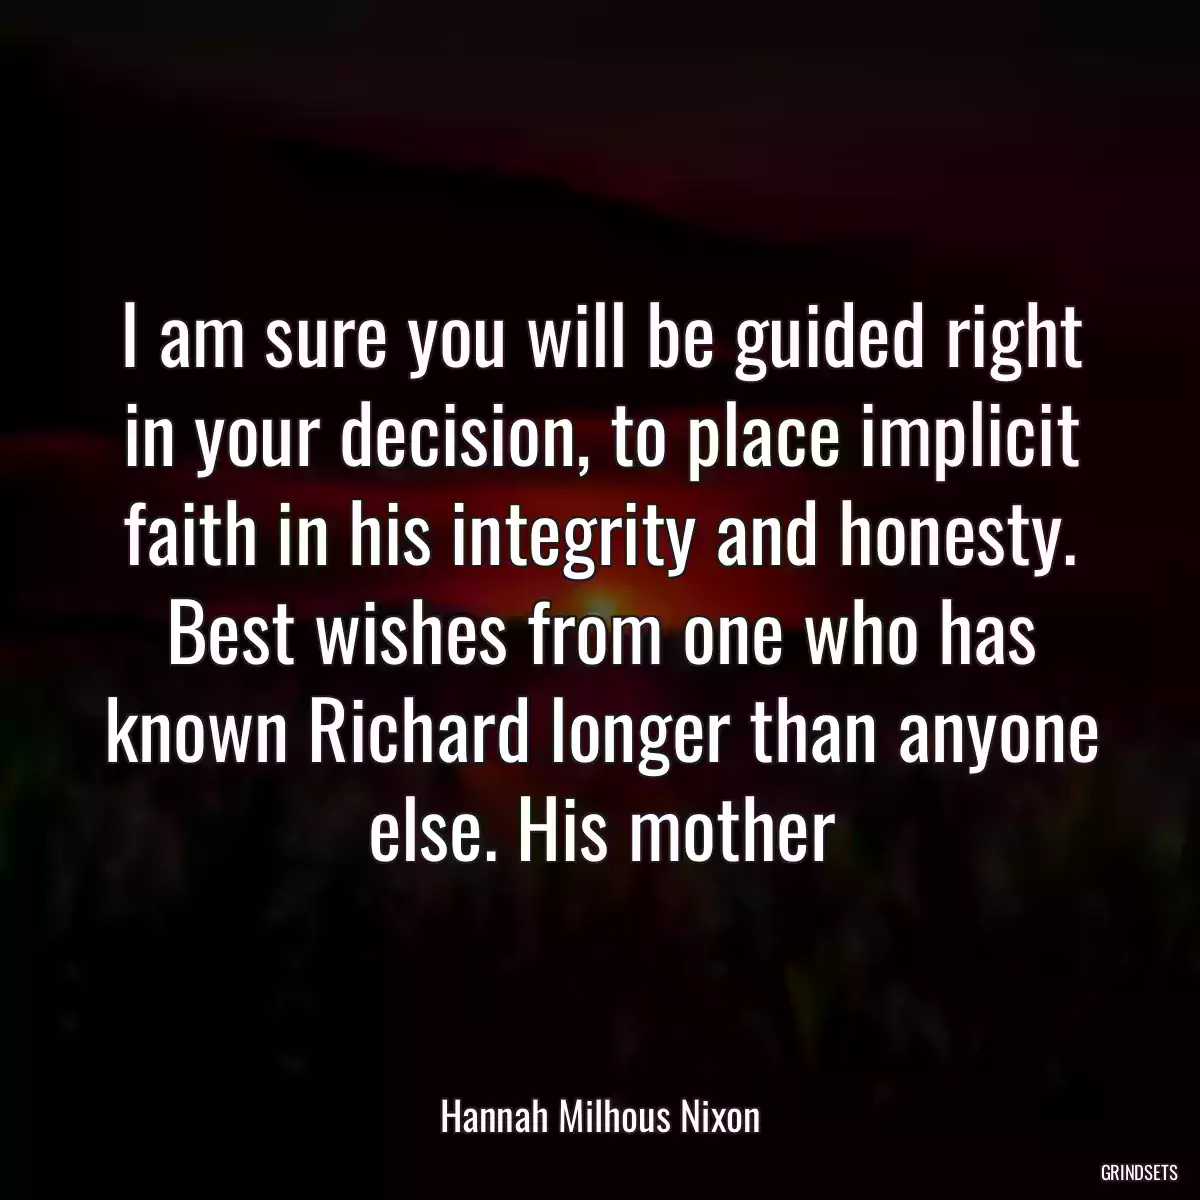 I am sure you will be guided right in your decision, to place implicit faith in his integrity and honesty. Best wishes from one who has known Richard longer than anyone else. His mother